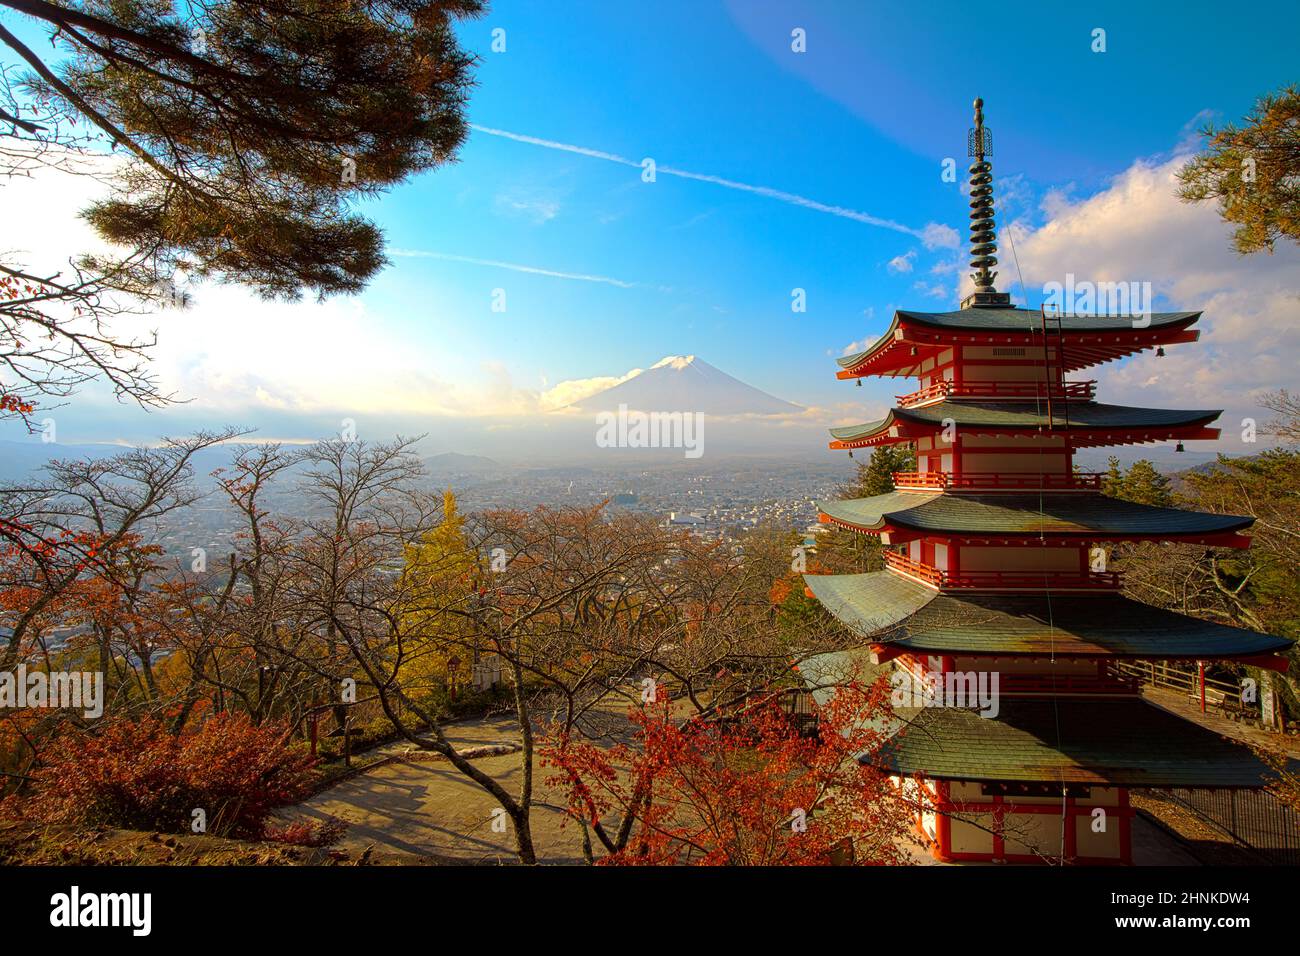 Beautiful Autumn scenery of Red pagoda Chureito the famous tourist attraction in fujinomiya town and Mount Fuji at sunset in Yamanashi prefecture, Japan Stock Photo